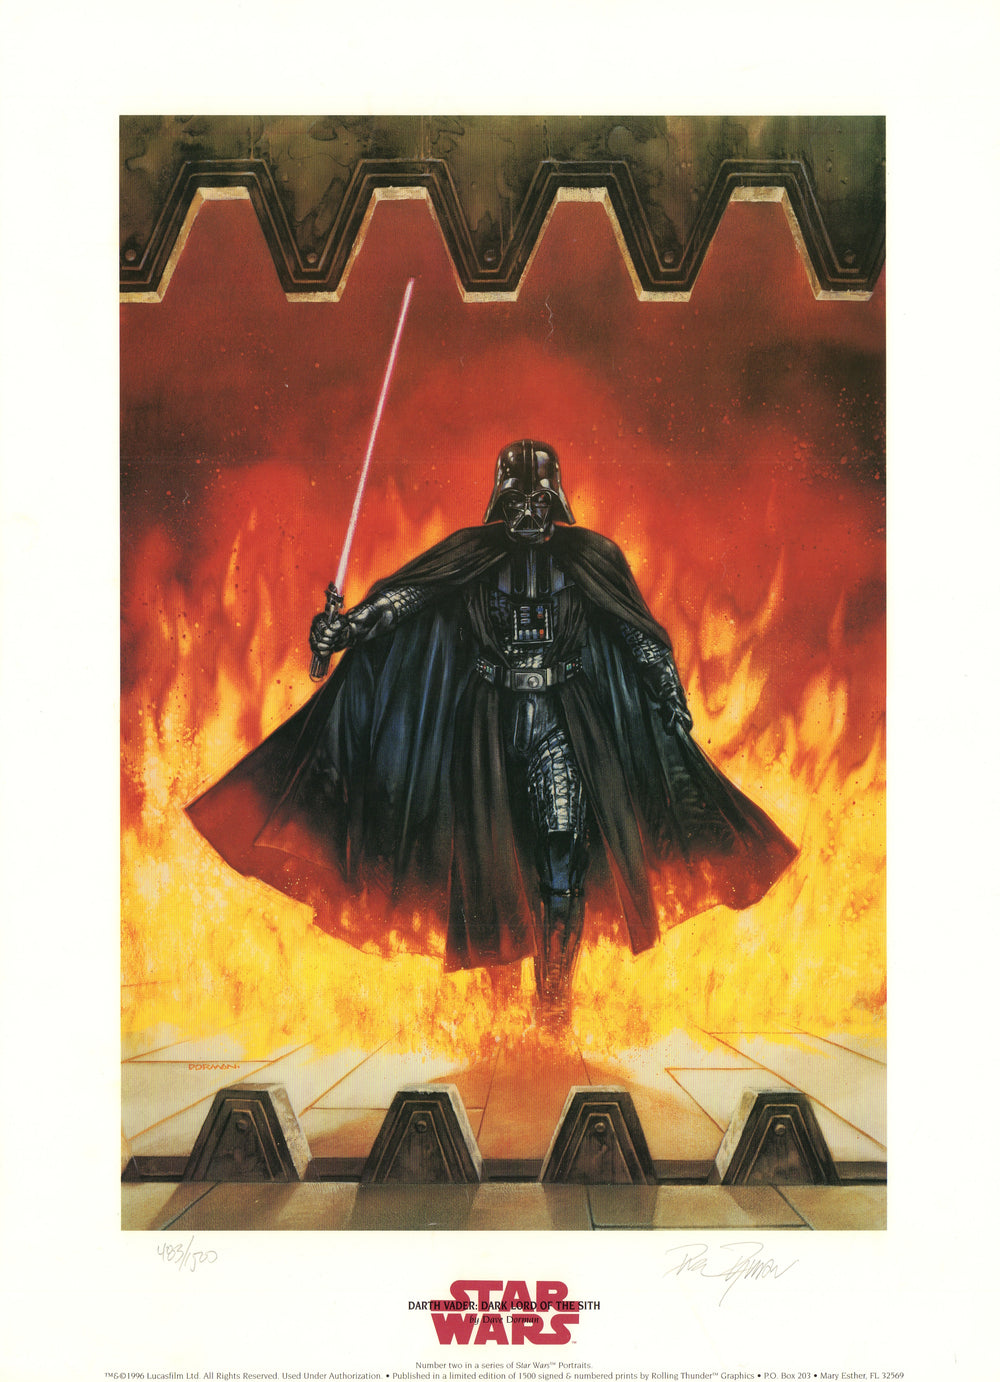 Star Wars Darth Vader: Dark Lord of the Sith 16x22 Print Signed by Dave Dorman